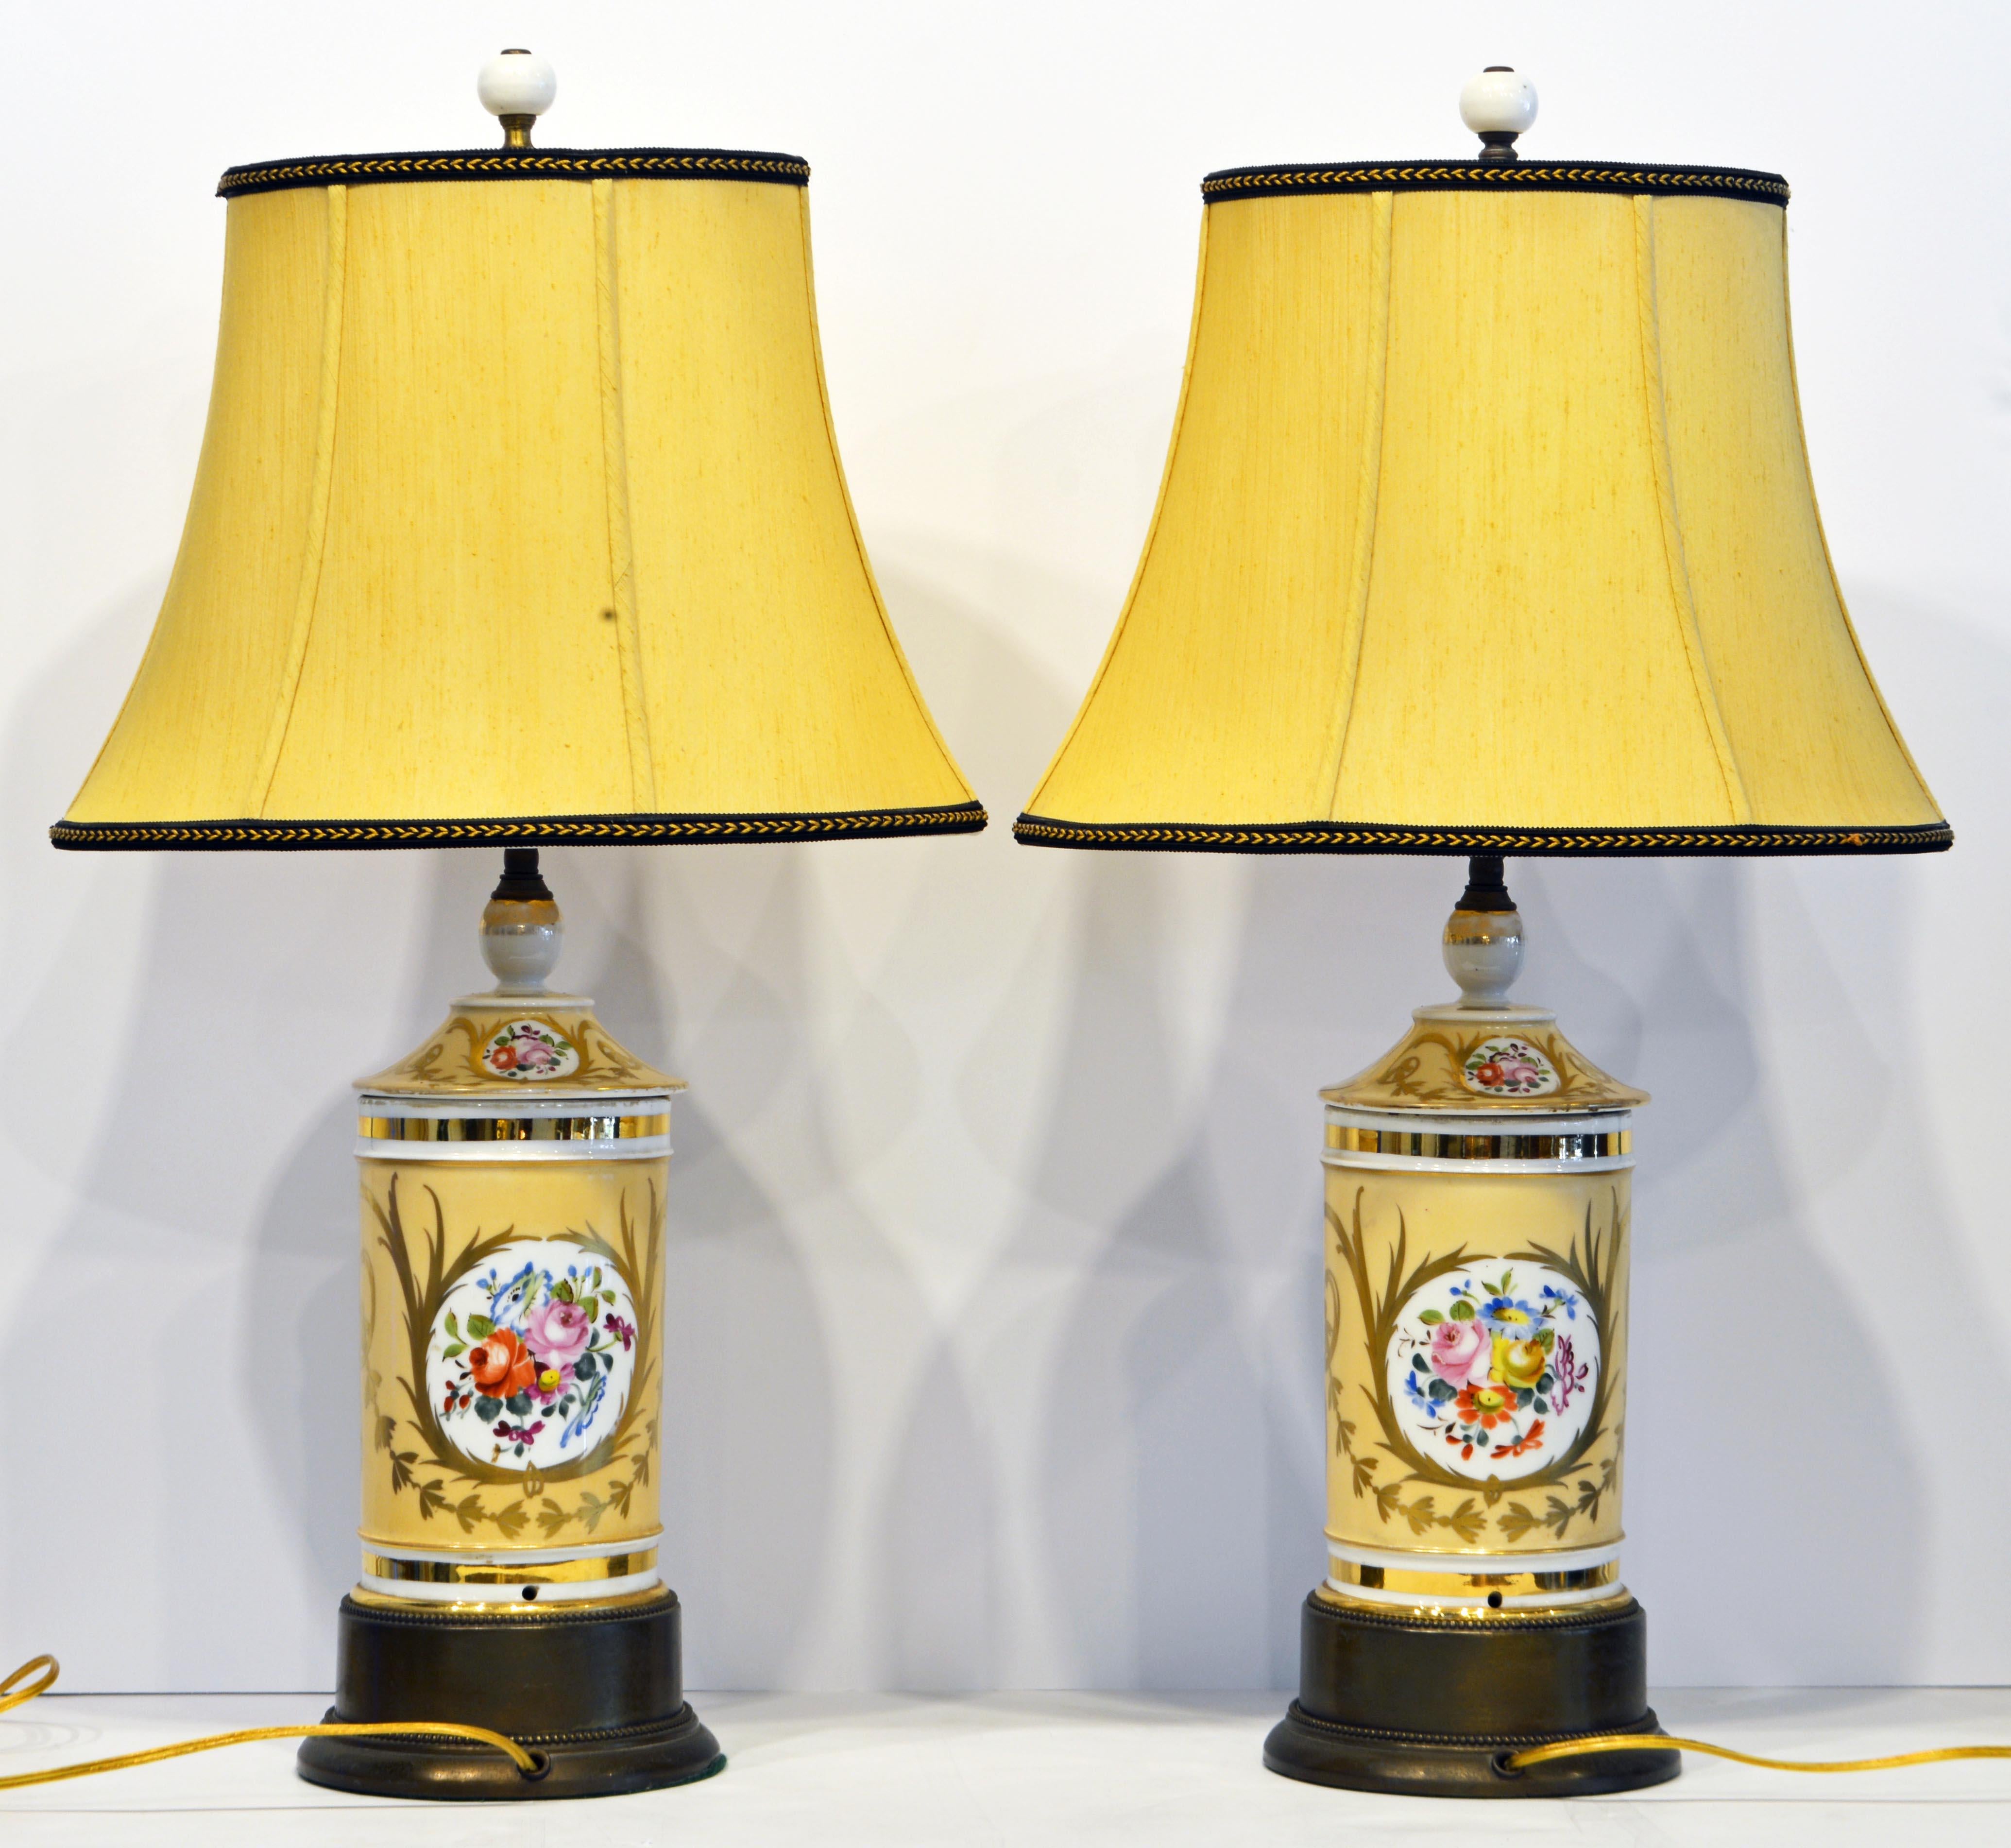 A fine pair of French 'Old Paris' porcelain apothecary Jars with nice slight wear proving their age, late 19th century. They are mounted on later patinated bronze bases to add extra height. The lamp shades are well chosen matching the yellow base of